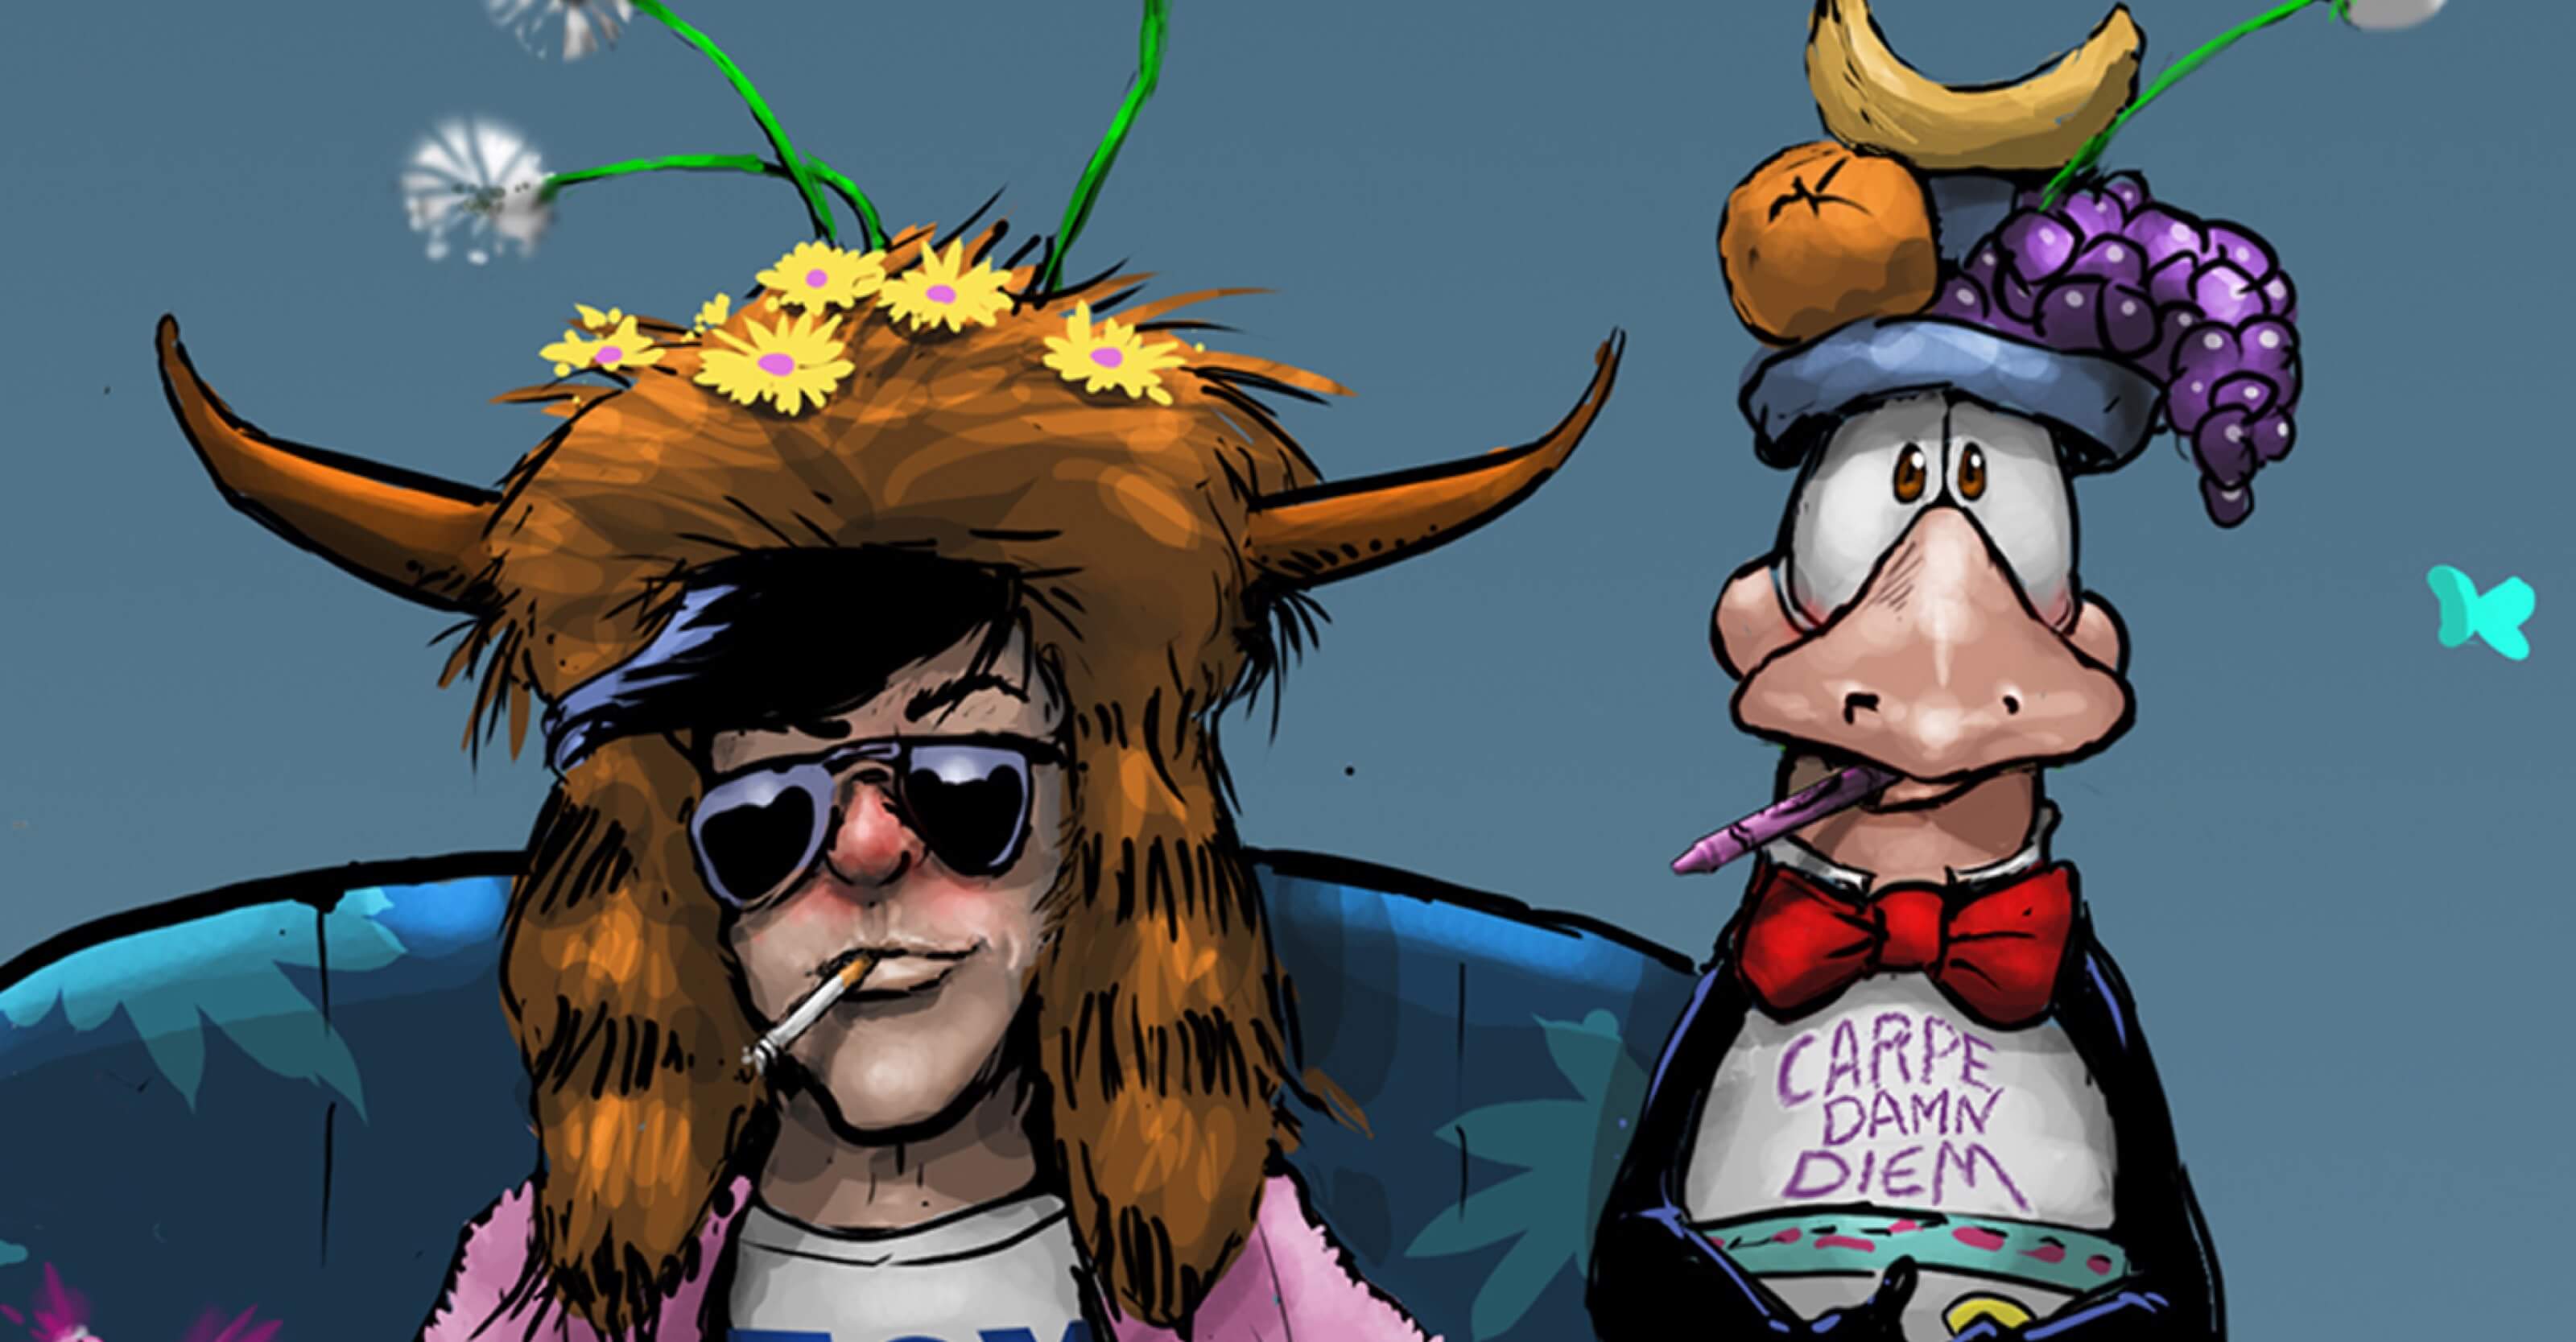 Berkeley Breathed's iconic comic strip, Bloom County, to be developed as animated comedy by Fox Entertainment, Bento Box Entertainment, Miramax, Spyglass Media Group and Project X Entertainment